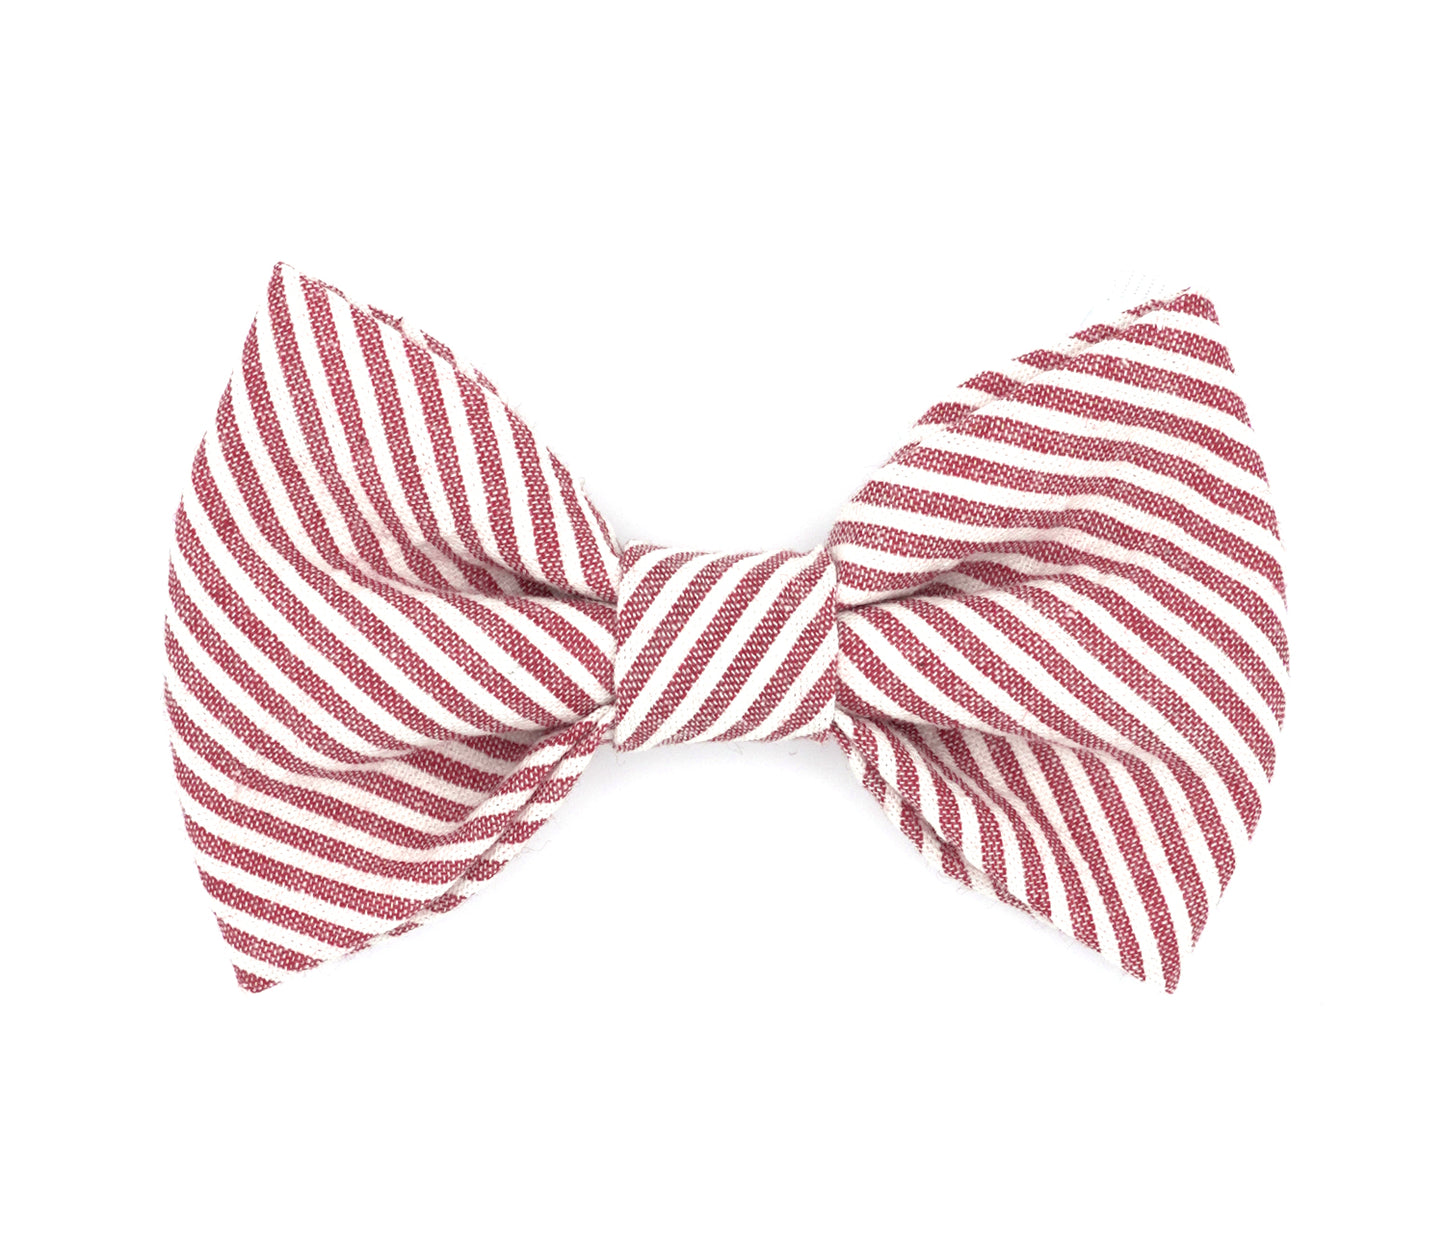 Handmade cotton bow tie for dogs (or other pets). Elastic straps on back with snaps make it easy to add to collar, harness, or leash. Red and white stripe seersucker.